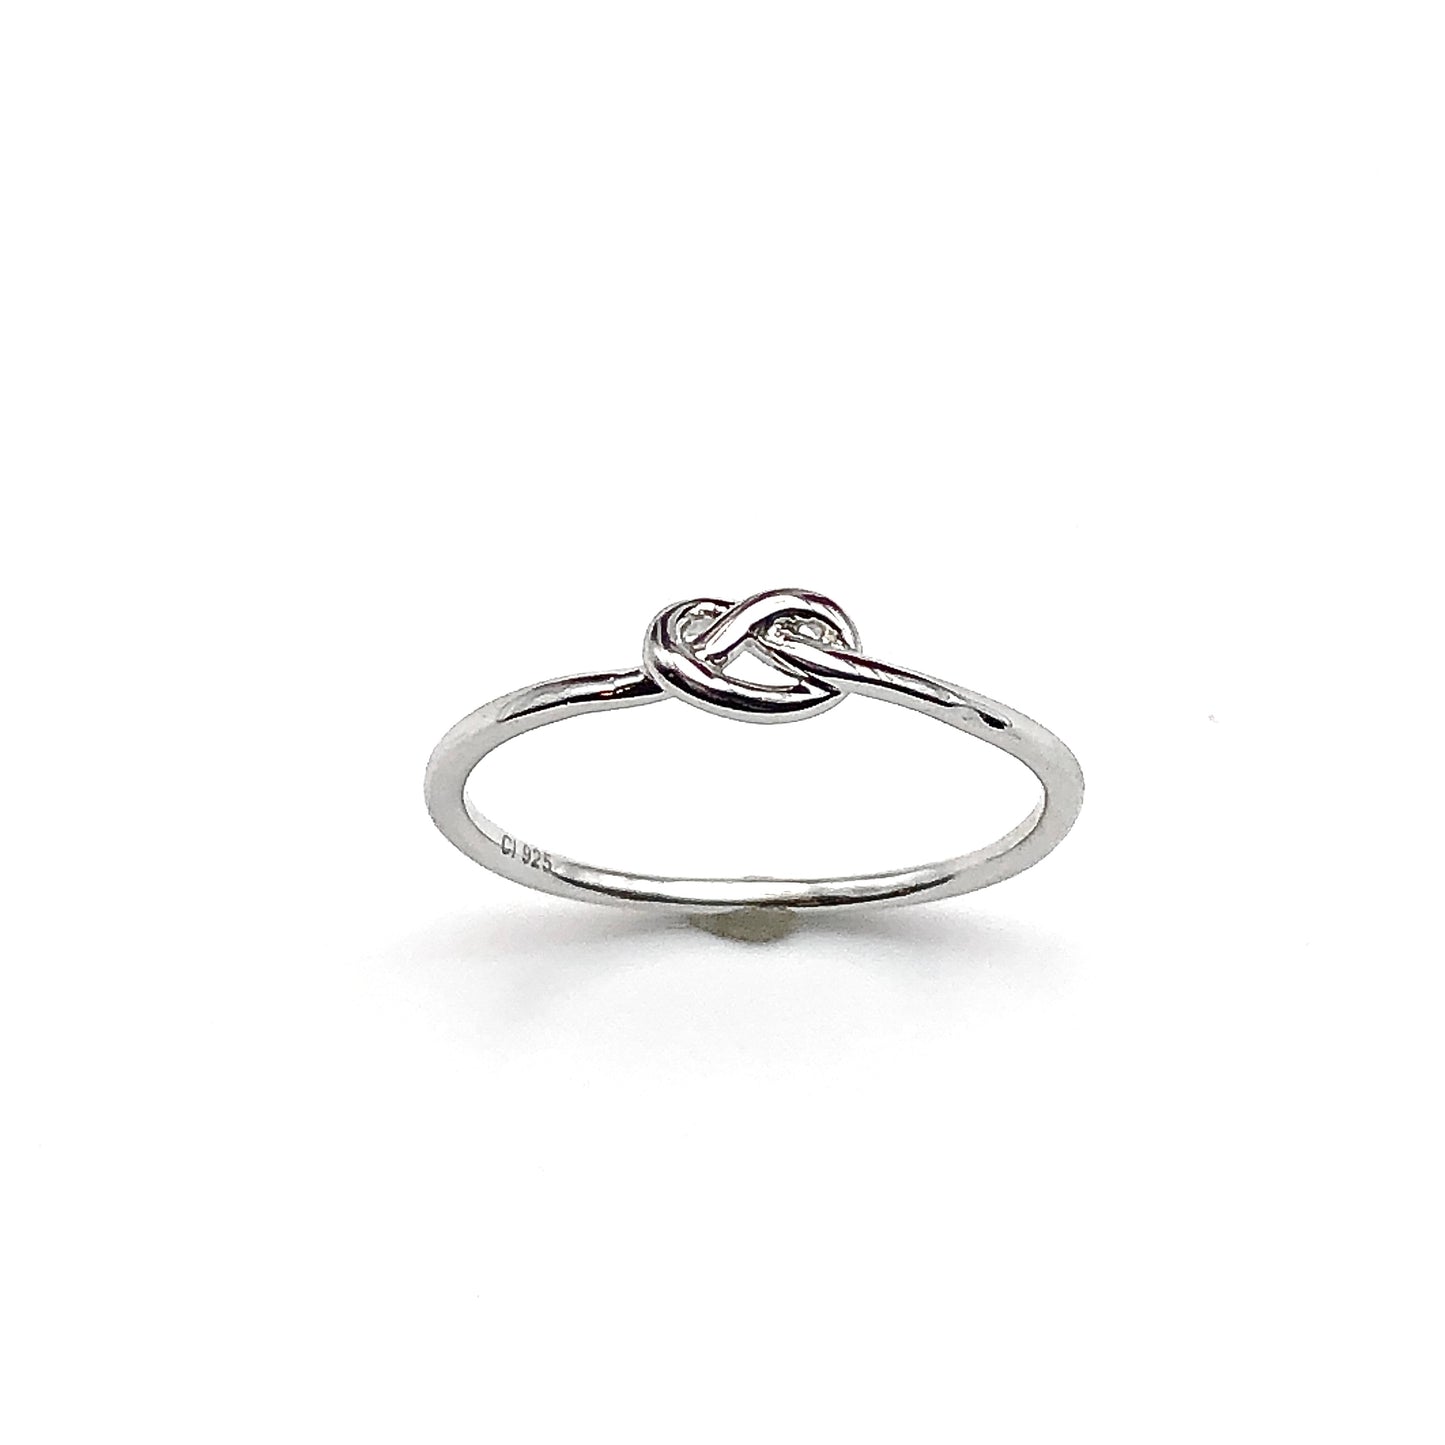 Sterling Silver Ring, sz7.25 Dainty Celtic Love Knot Design Thin Style Band Ring